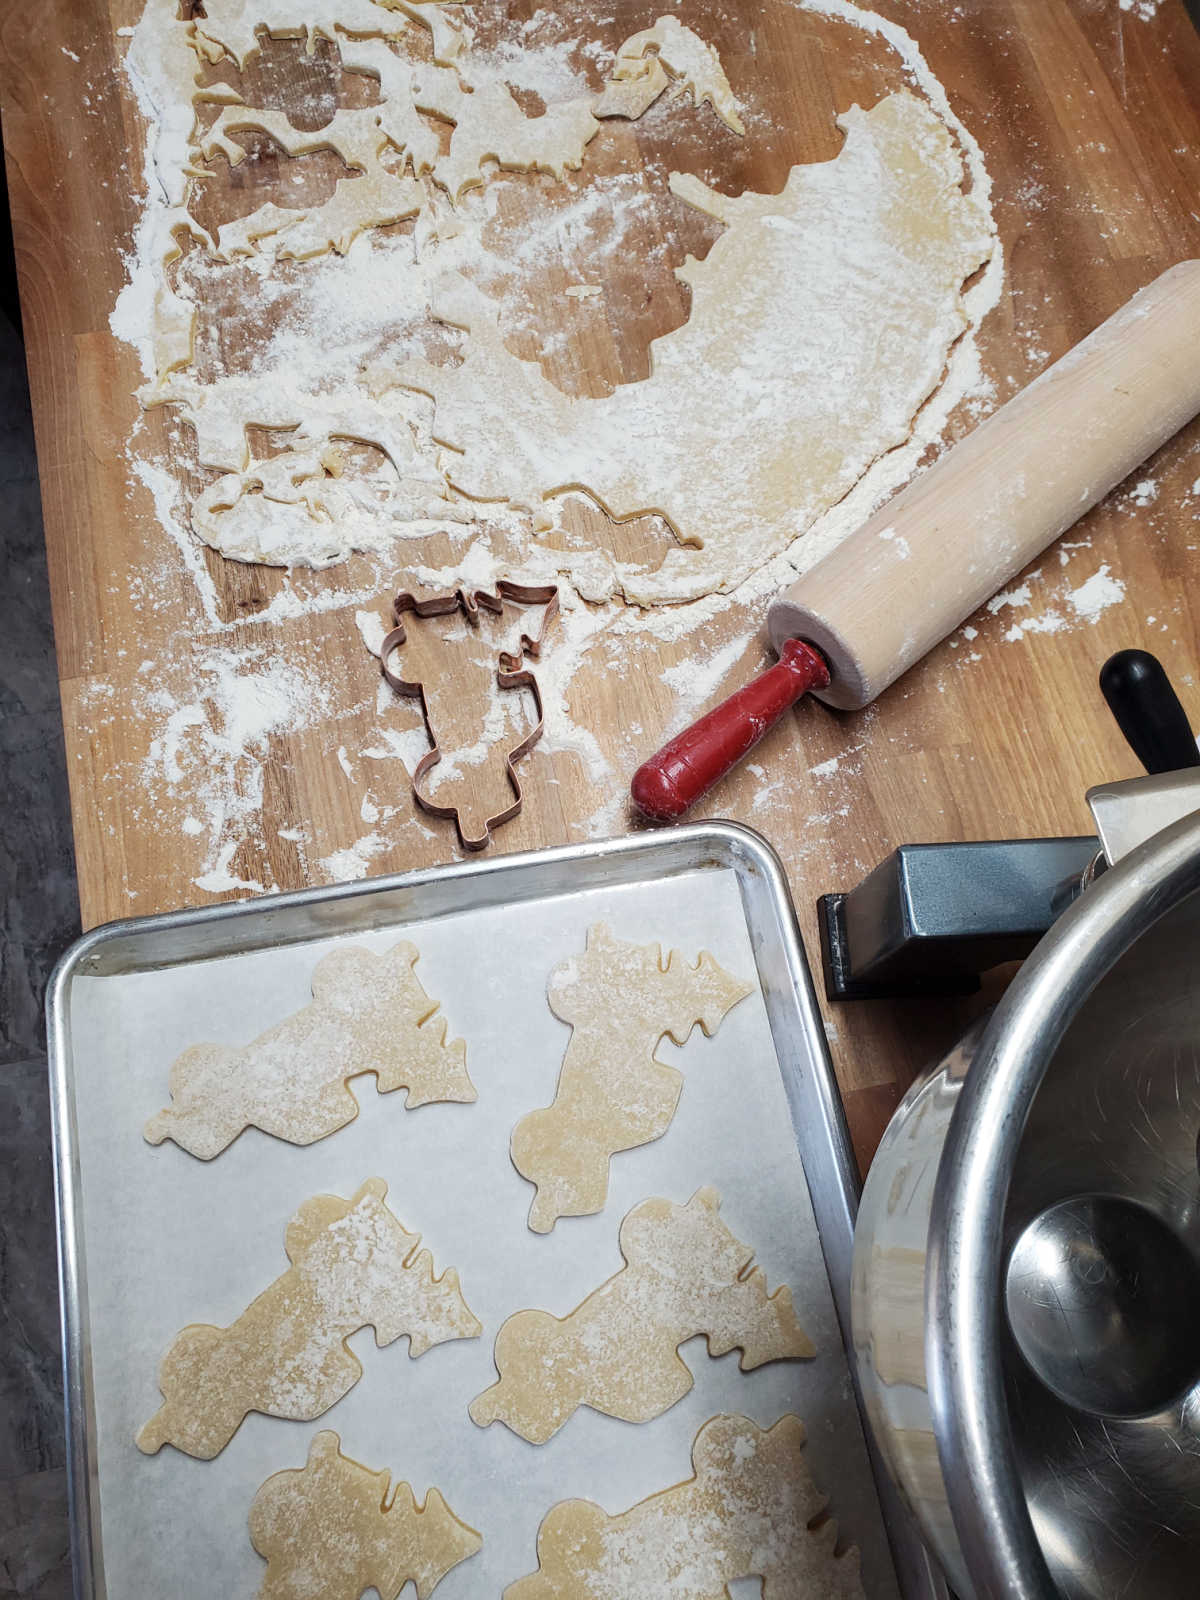 Christmas cookies of vintage trucks cut out on butcher block.